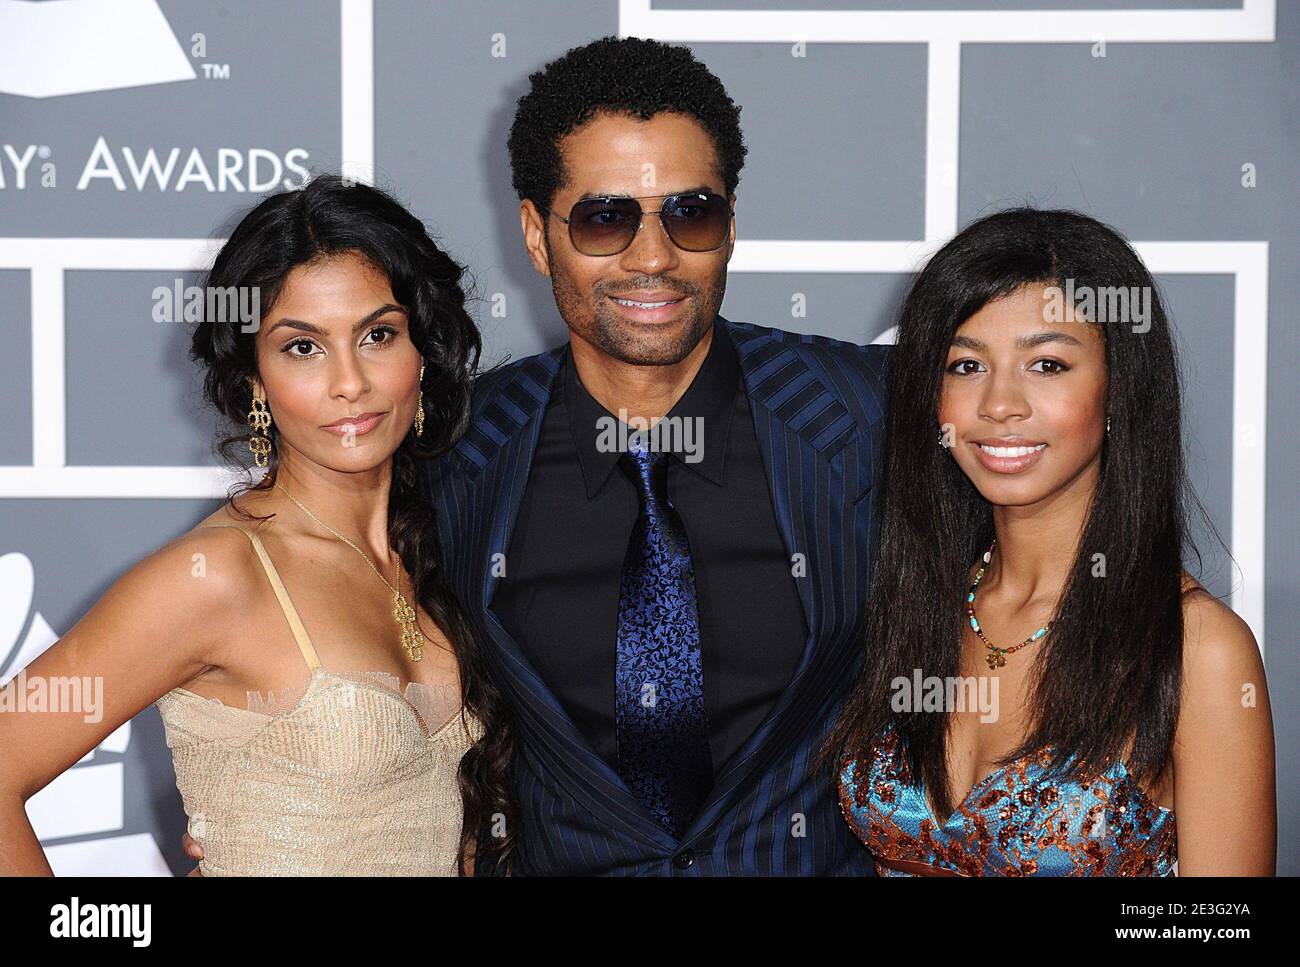 Eric Benet, Manuela Testolini (left) and daughter India arriving at the 51st Annual Grammy Awards, held at the Staples Center in Los Angeles, CA, USA on February 8, 2009. Photo by Lionel Hahn/ABACAUSA.COM (Pictured : Manuela Testolini, Eric Benet, India) Stock Photo